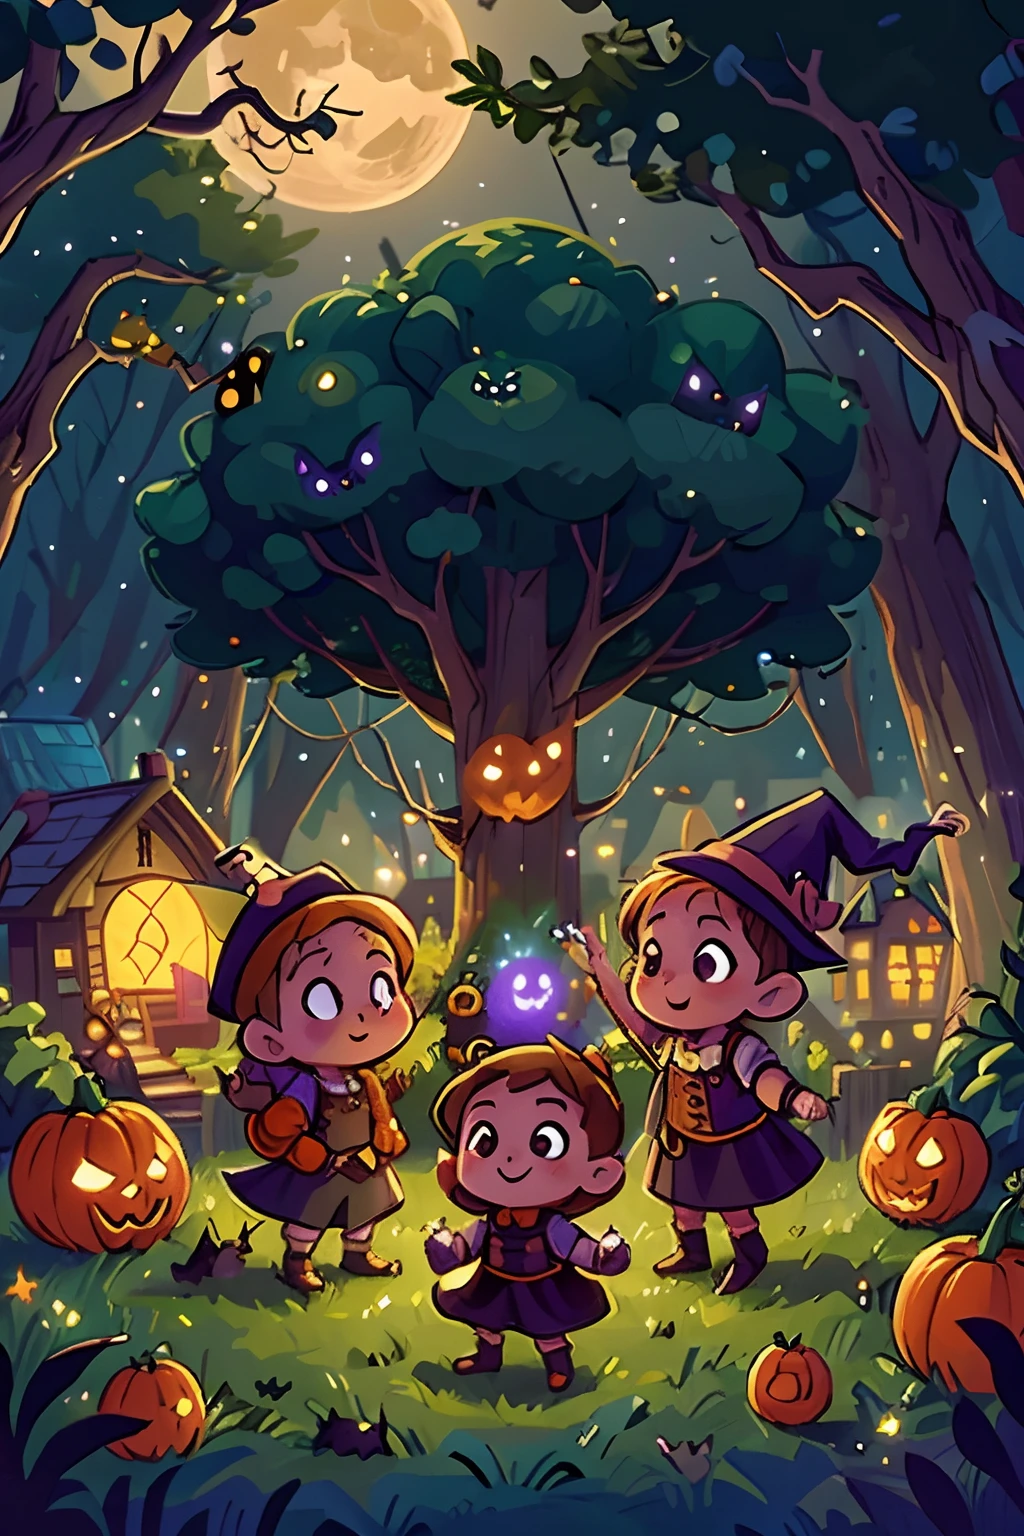 draw a group of very cute young witches and some cute gnomes dancing around some Halloween pumpkins. Starry night, huge full moon, happy characters. Lights of a small village at night, bats and owls and trees